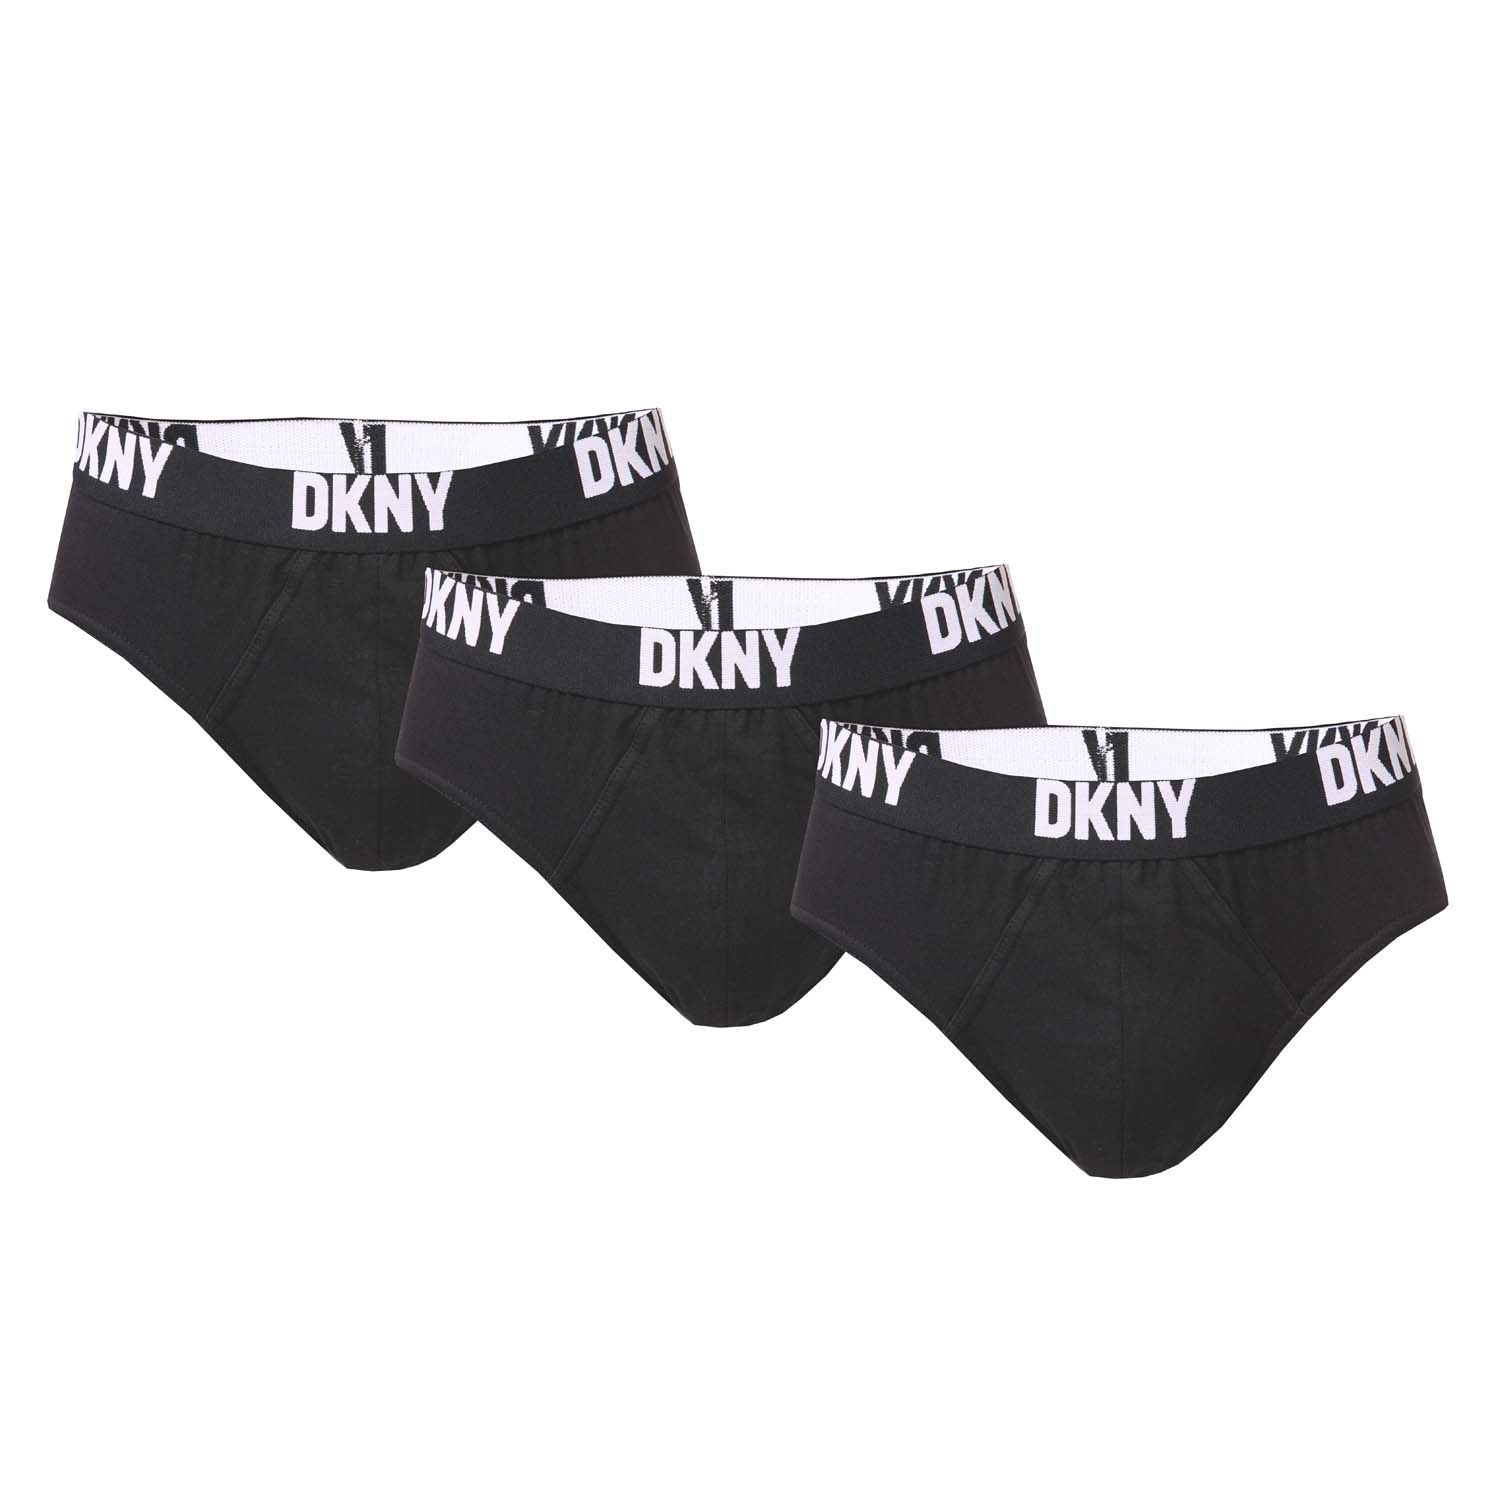 Mens DKNY Kelso 3 Pack Briefs in black.- Branded elasticated waist.- Brief cut.- Reinforced pouch.- Soft construction.- 95% Cotton  5% Elastane. Machine washable.- Ref: U56642S = 30-32inM = 33-35inL = 36-38inXL = 36-38inWe regret that underwear is non-returnable due to hygiene reasons.